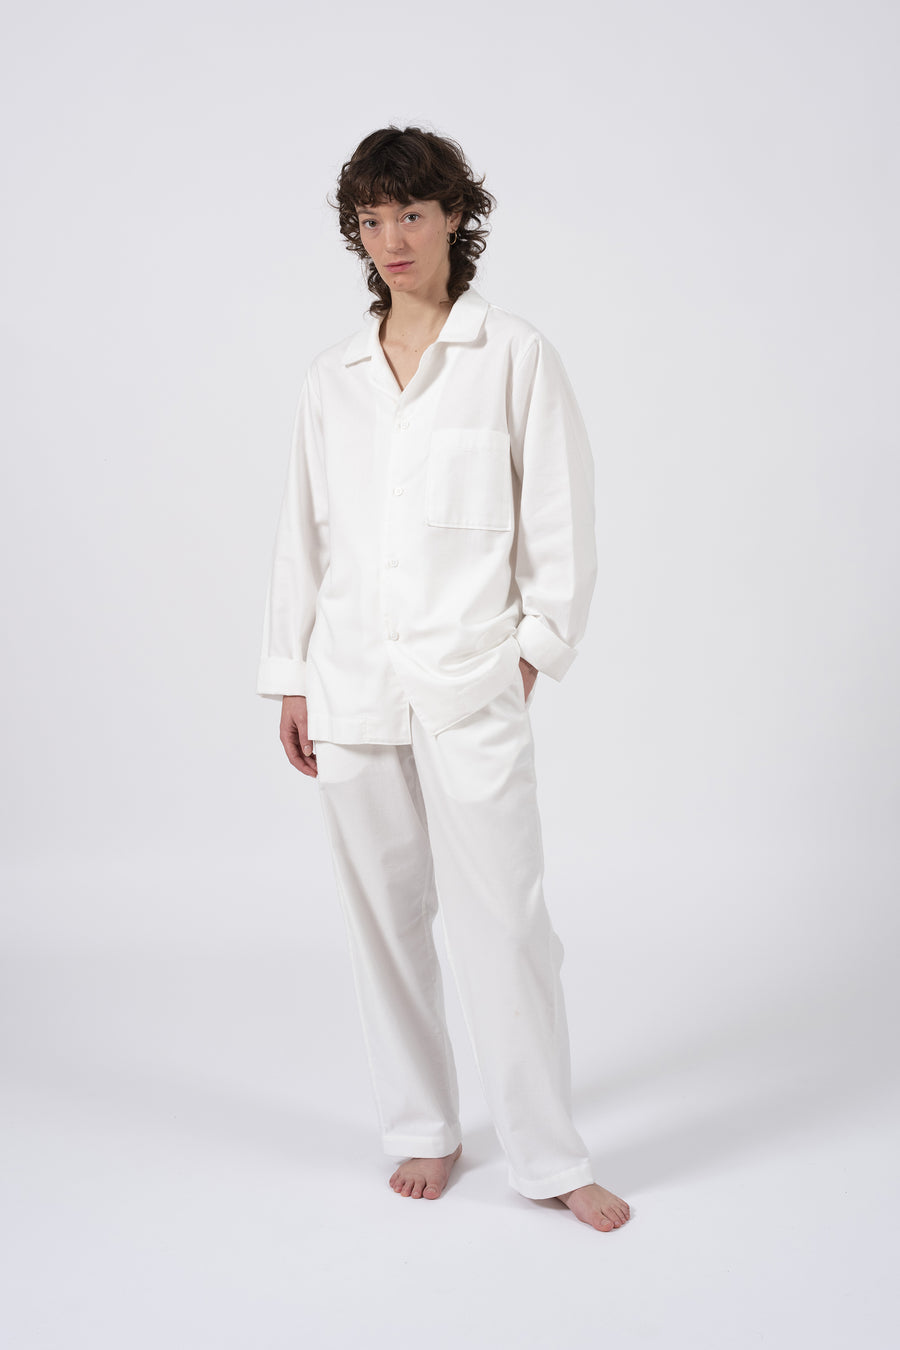 chemise d'intérieur indoor loungewear shirt made in portugal tencel lyocell coton organique organic cotton premium